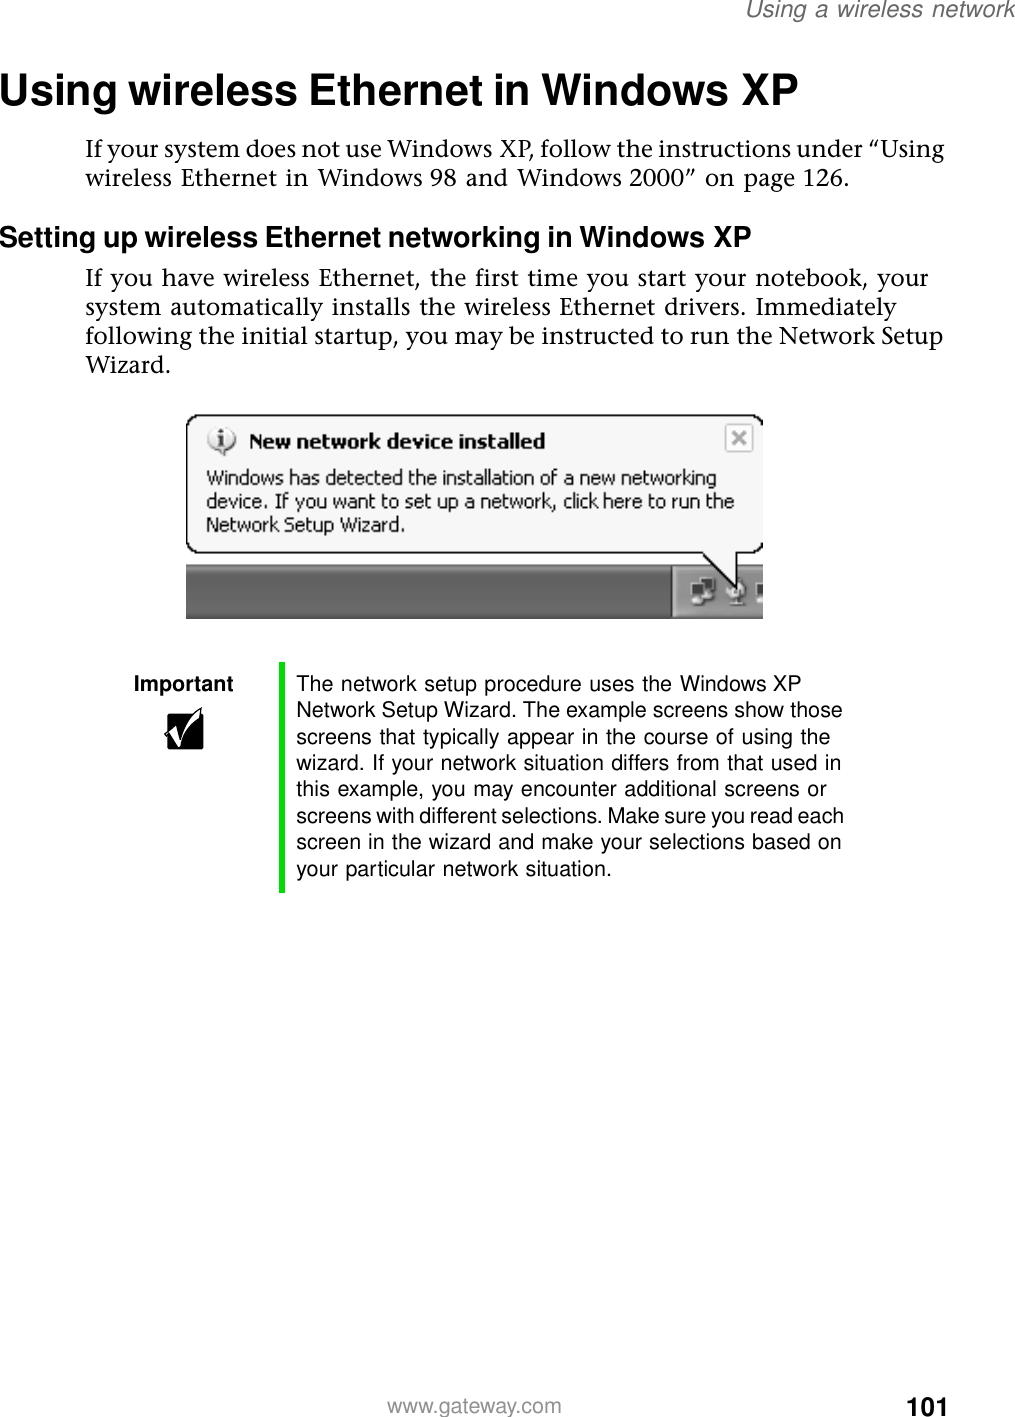 101Using a wireless networkwww.gateway.comUsing wireless Ethernet in Windows XPIf your system does not use Windows XP, follow the instructions under “Using wireless Ethernet in Windows 98 and Windows 2000” on page 126.Setting up wireless Ethernet networking in Windows XPIf you have wireless Ethernet, the first time you start your notebook, your system automatically installs the wireless Ethernet drivers. Immediately following the initial startup, you may be instructed to run the Network Setup Wizard.Important The network setup procedure uses the Windows XP Network Setup Wizard. The example screens show those screens that typically appear in the course of using the wizard. If your network situation differs from that used in this example, you may encounter additional screens or screens with different selections. Make sure you read each screen in the wizard and make your selections based on your particular network situation.